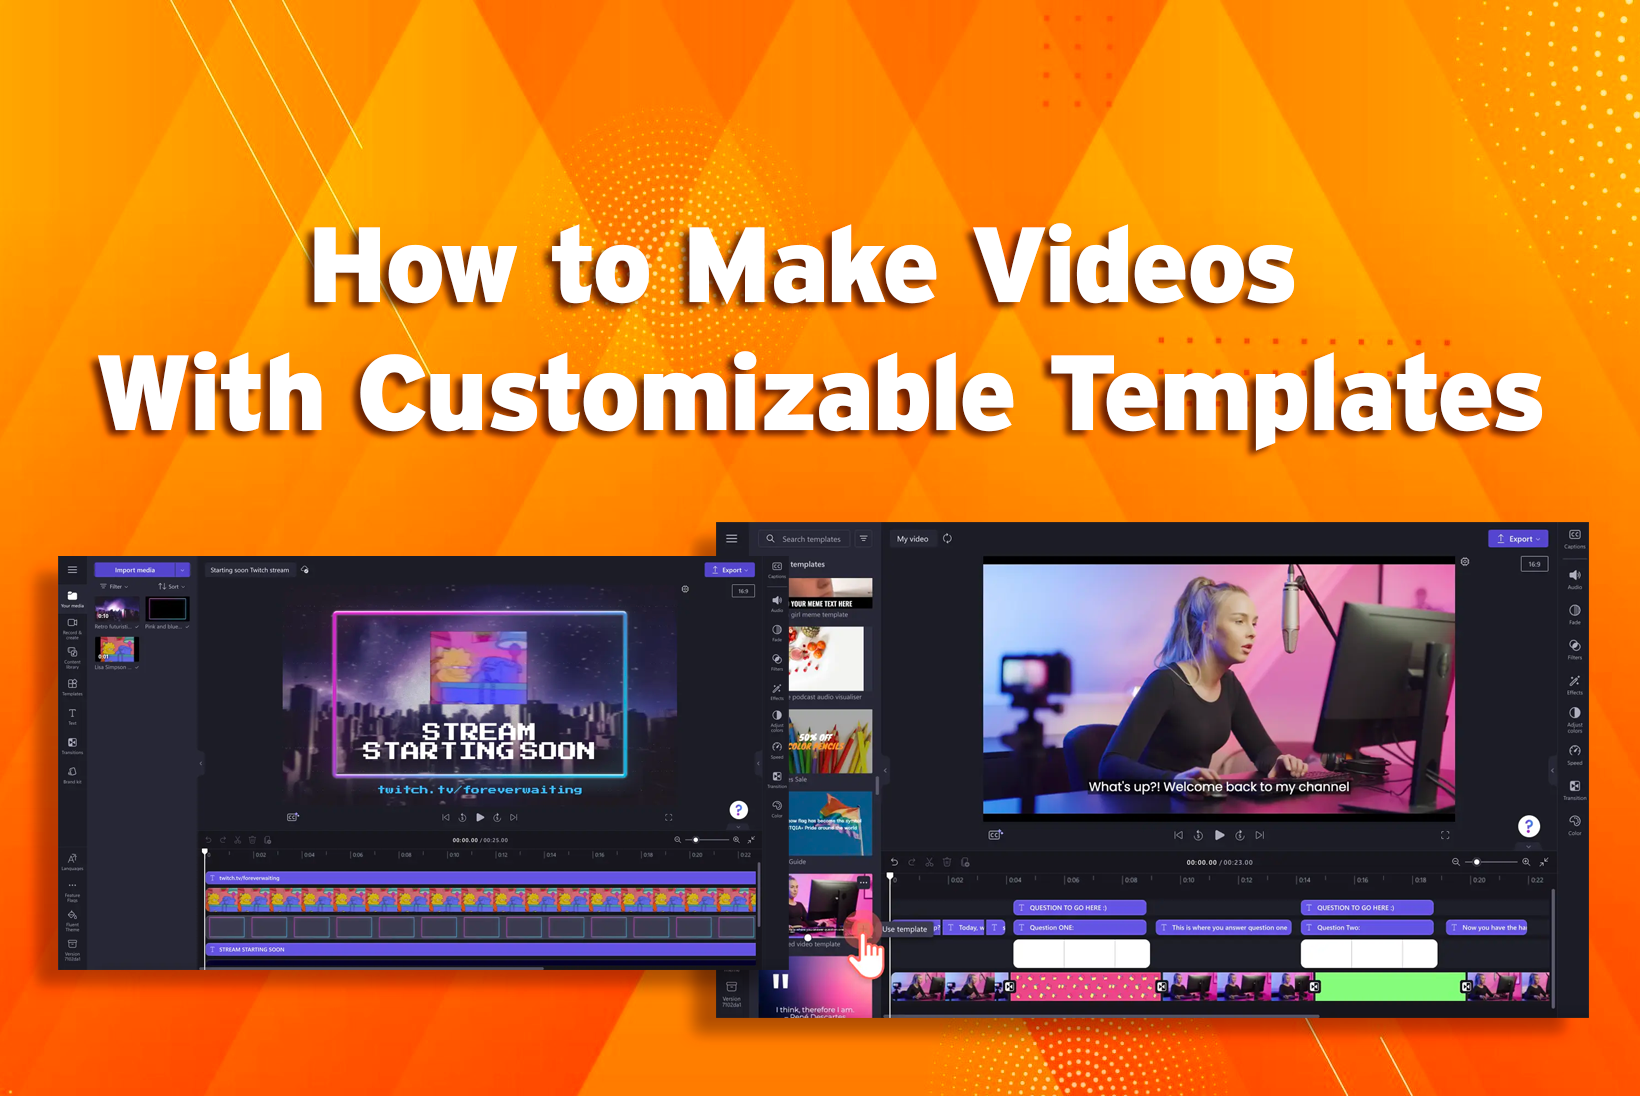 How to Make Videos using Customizable Templates